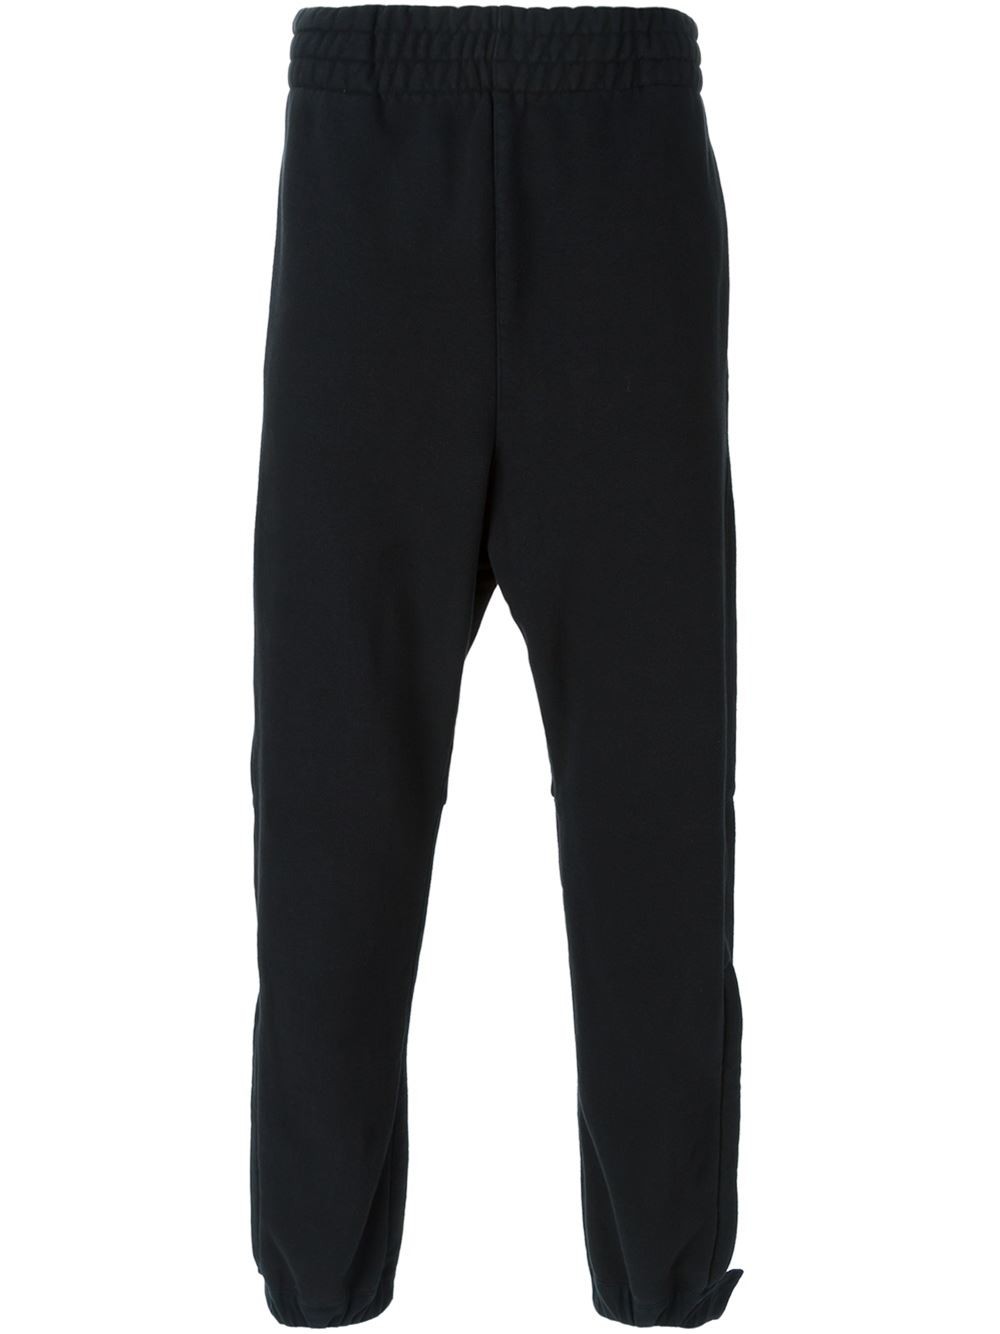 Yeezy Adidas Originals By Kanye West Track Pants | ModeSens